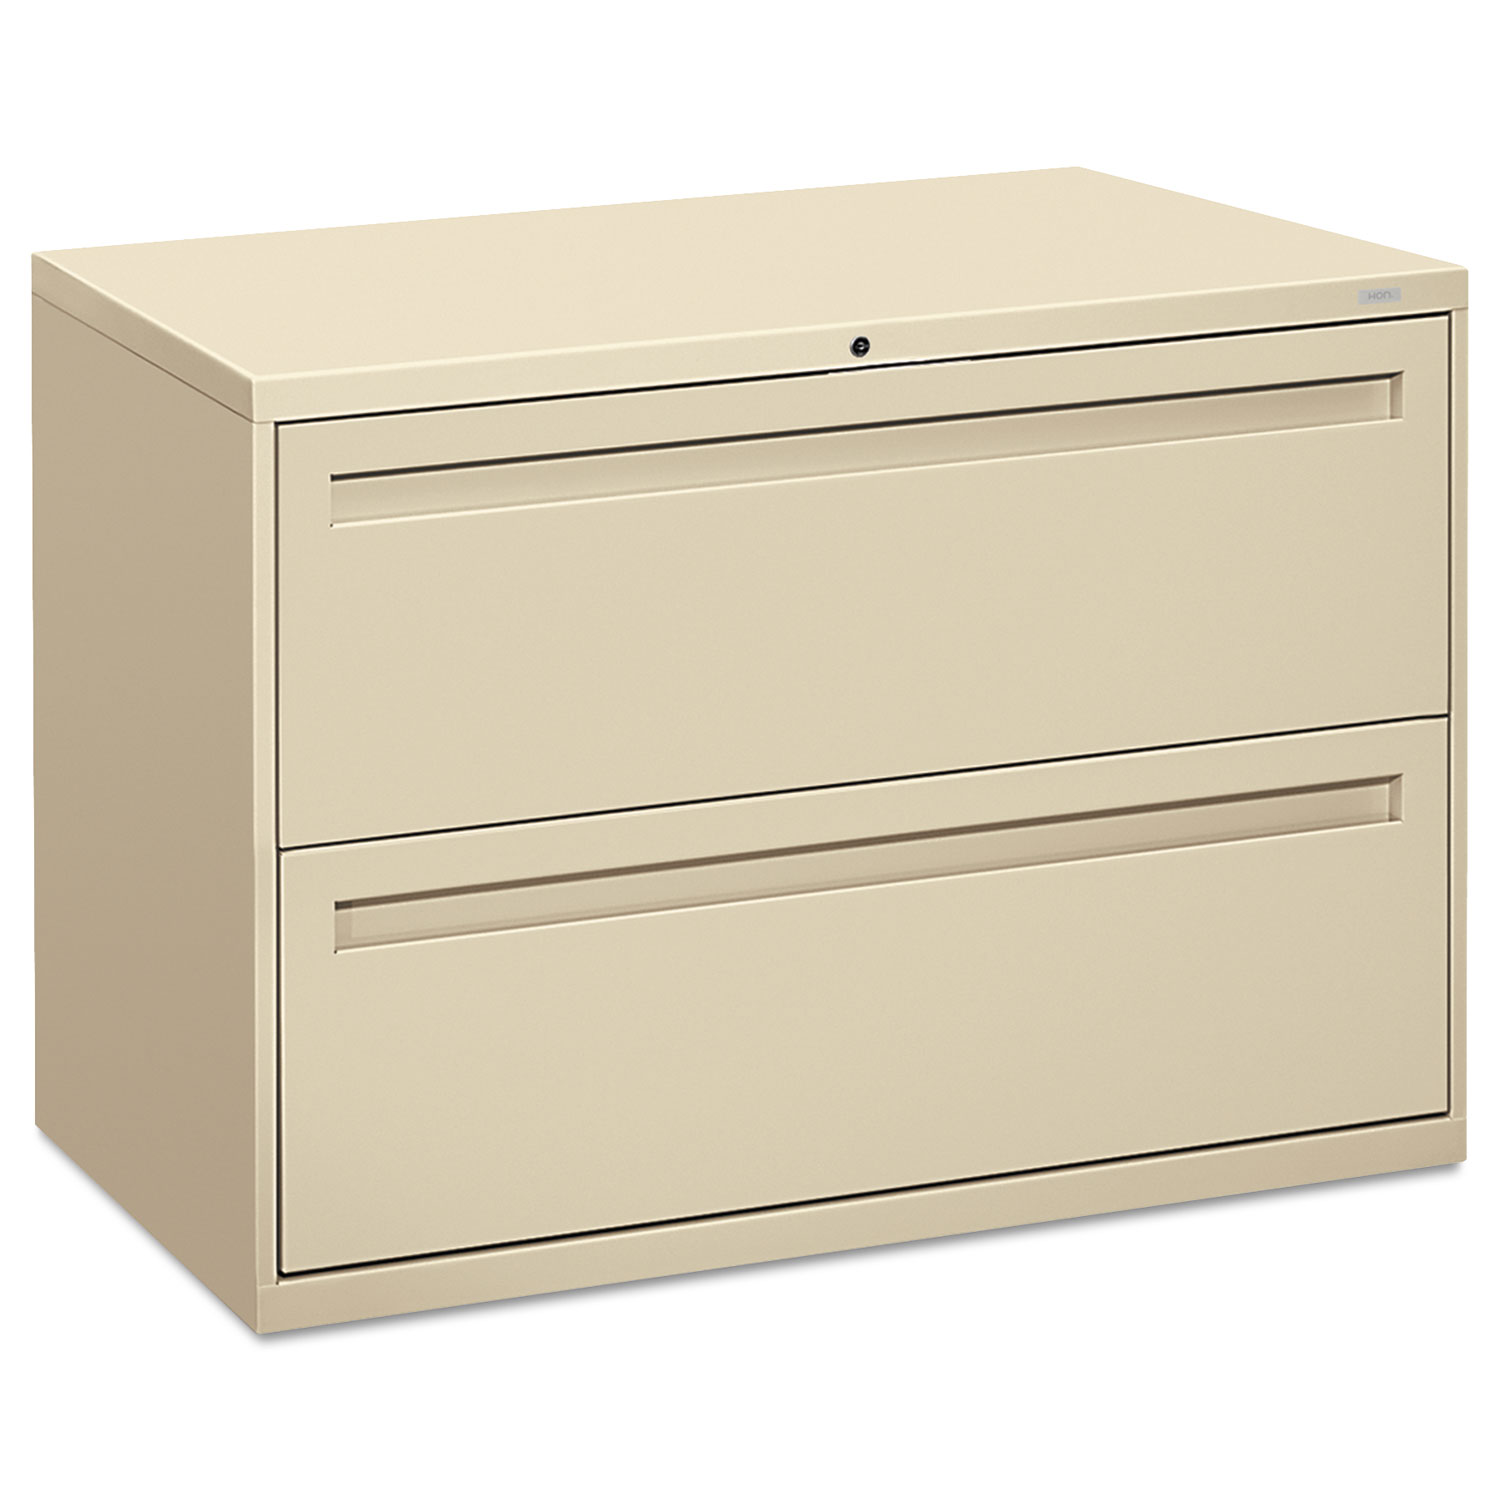 700 Series Two-Drawer Lateral File, 42w x 19-1/4d, Putty